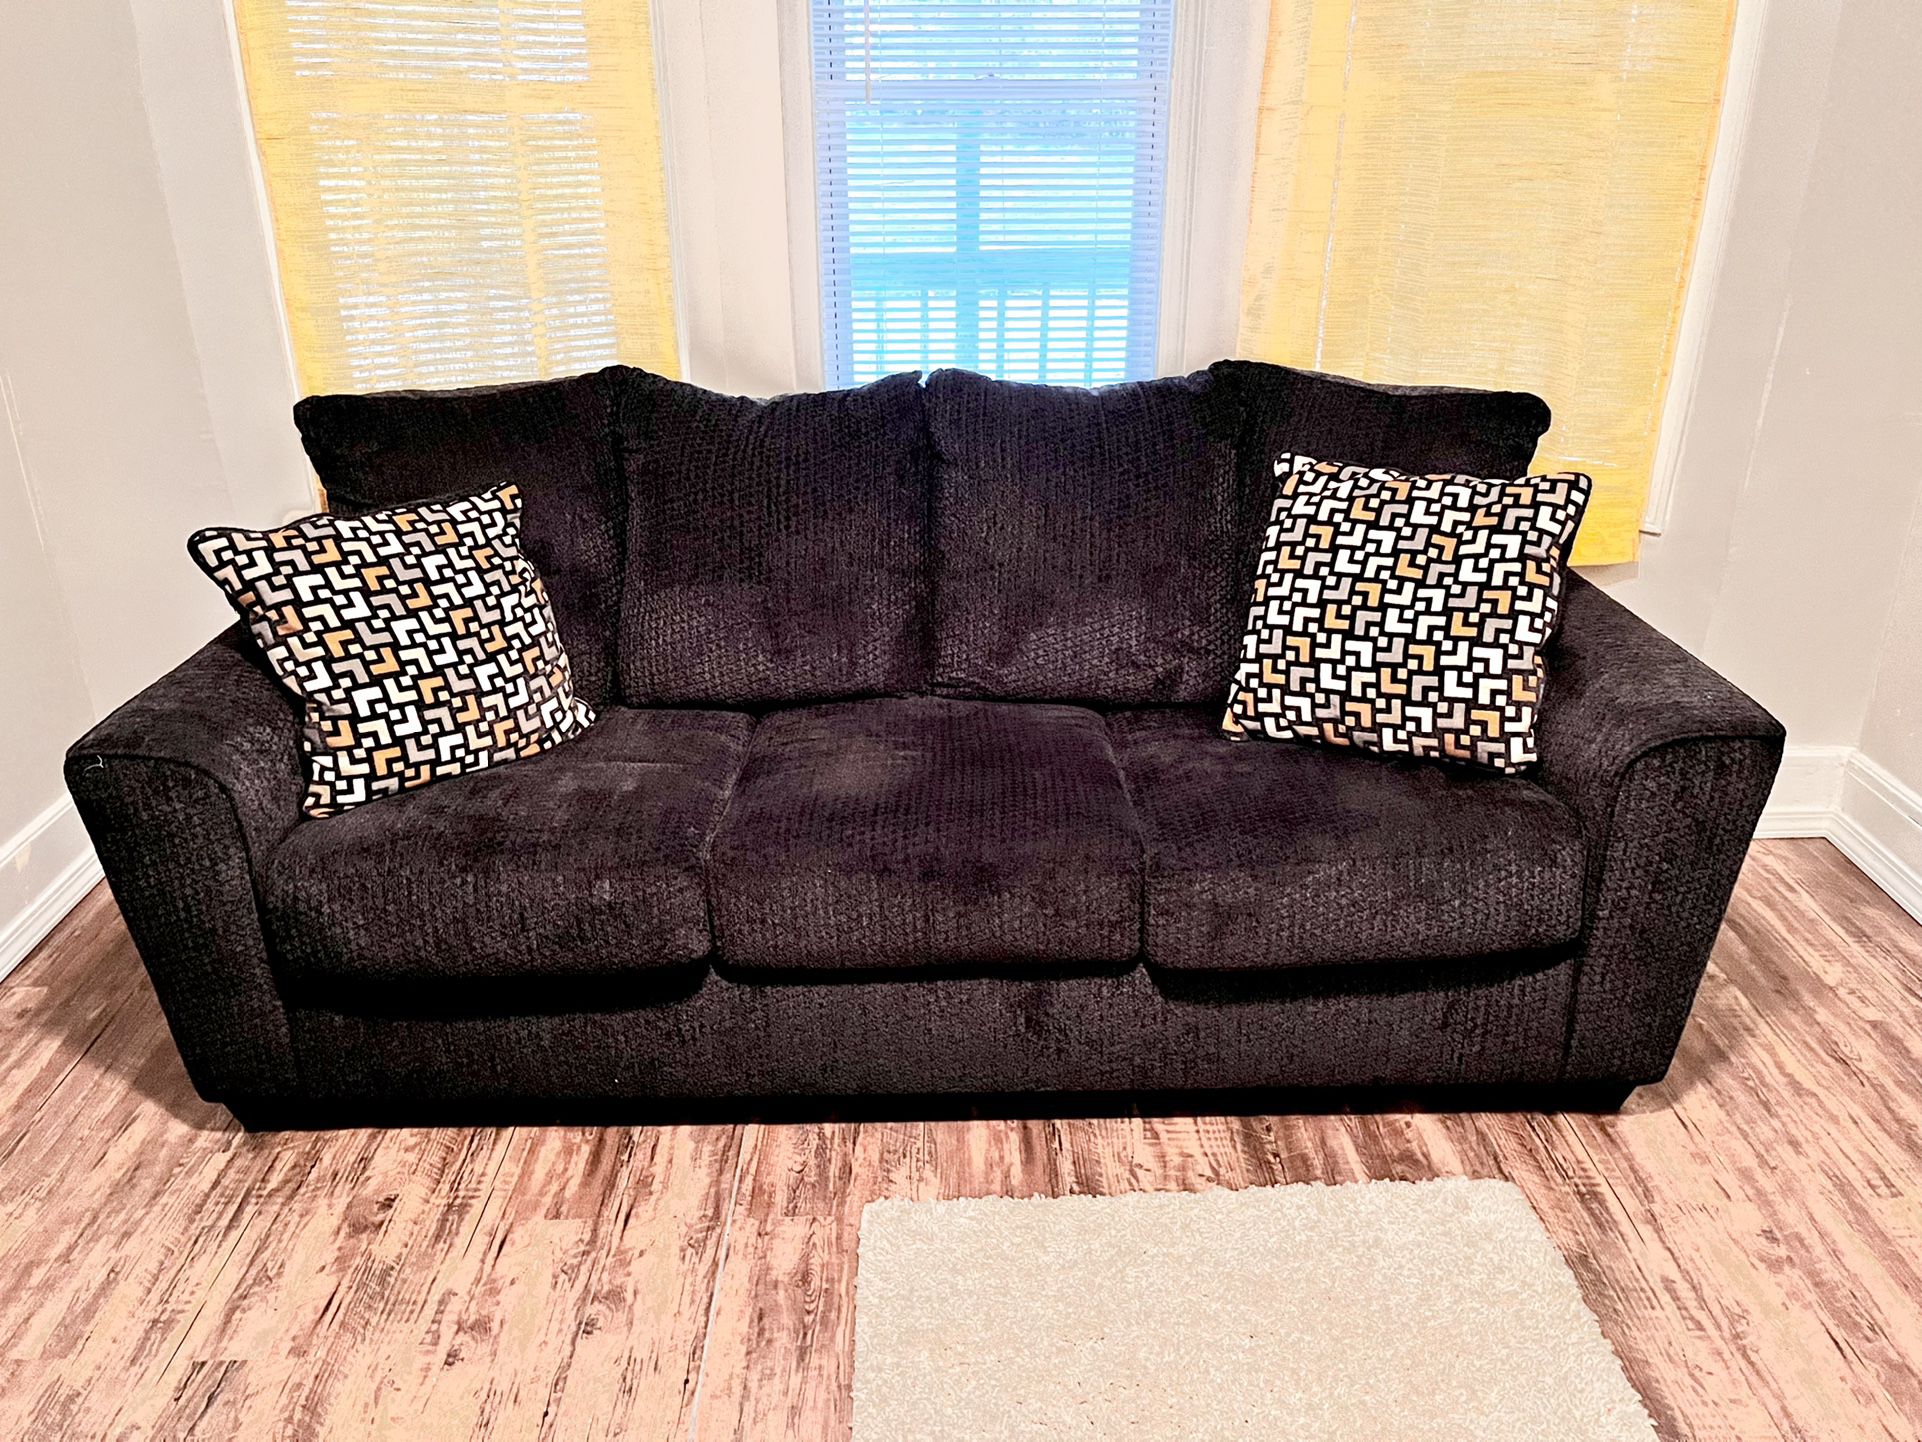 Blue/grey Couch